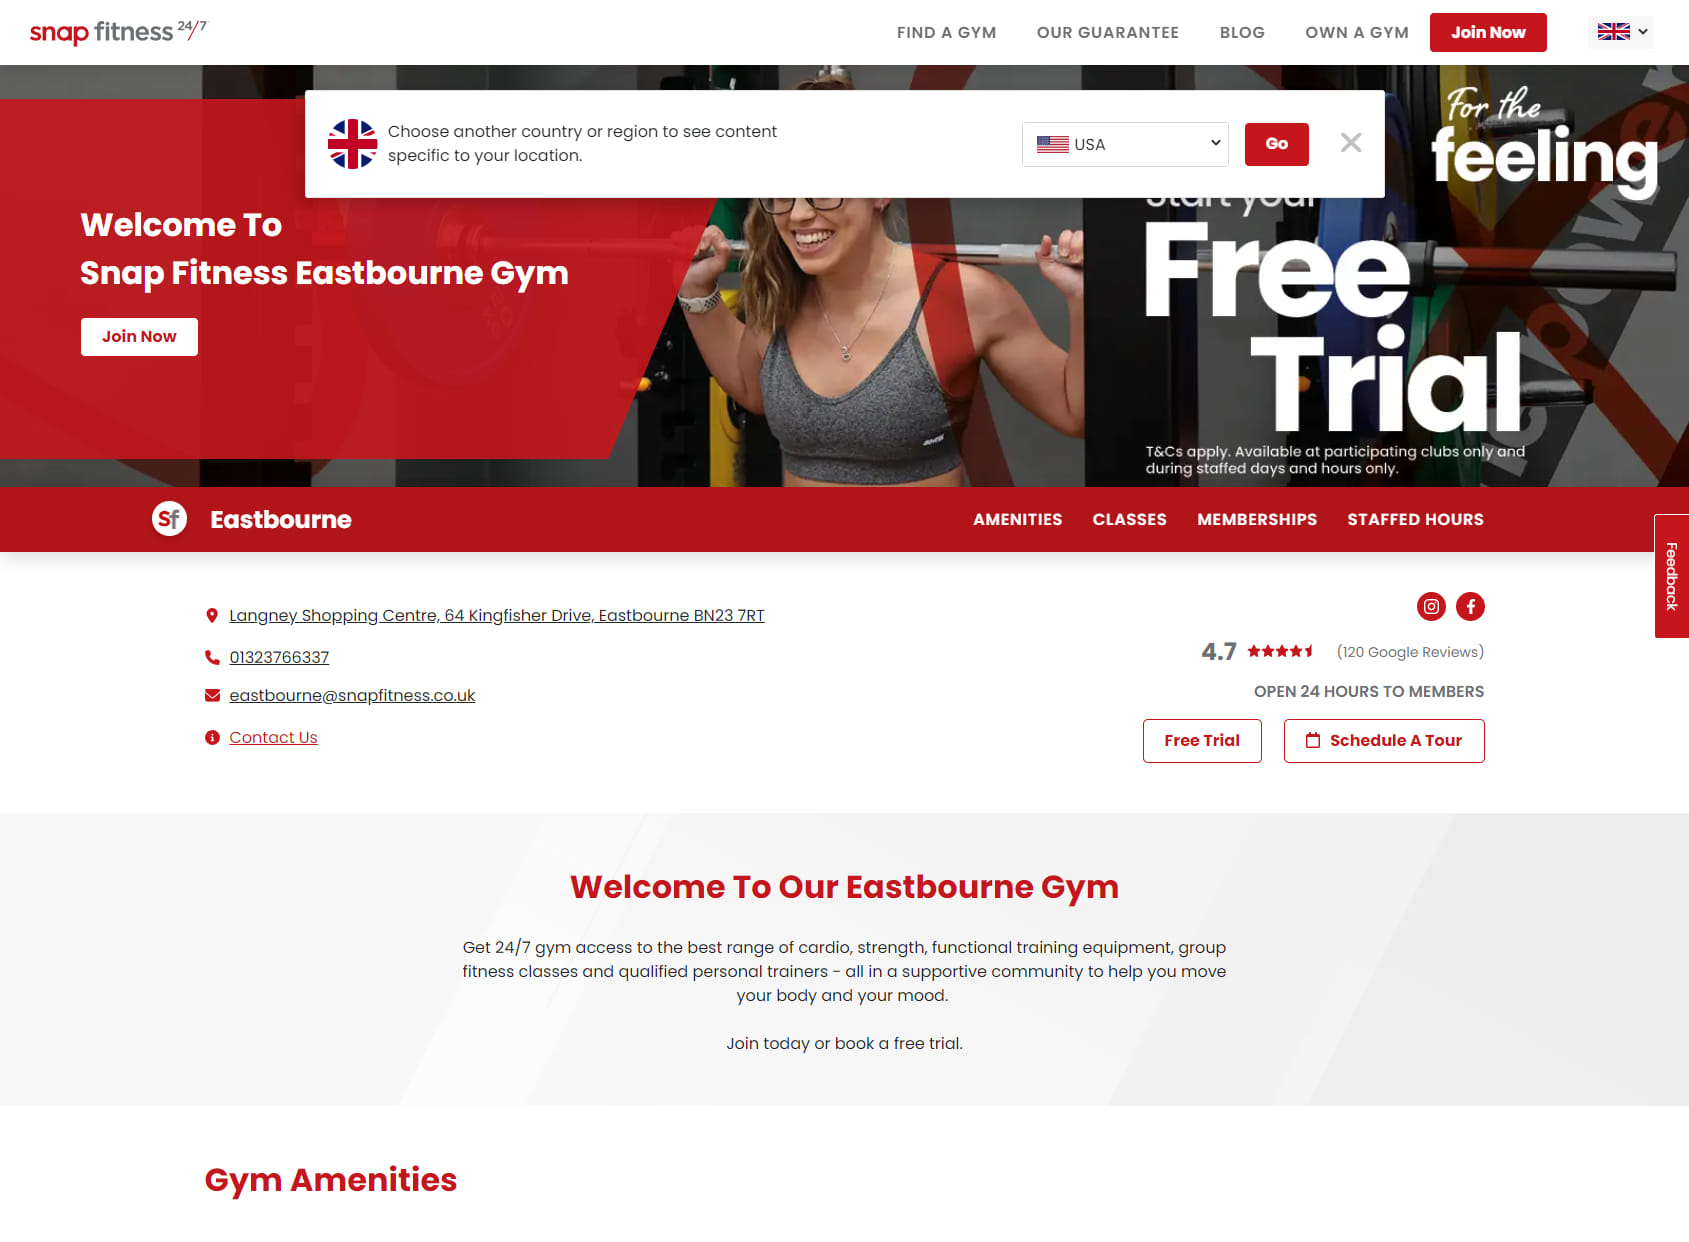 Snap Fitness Eastbourne